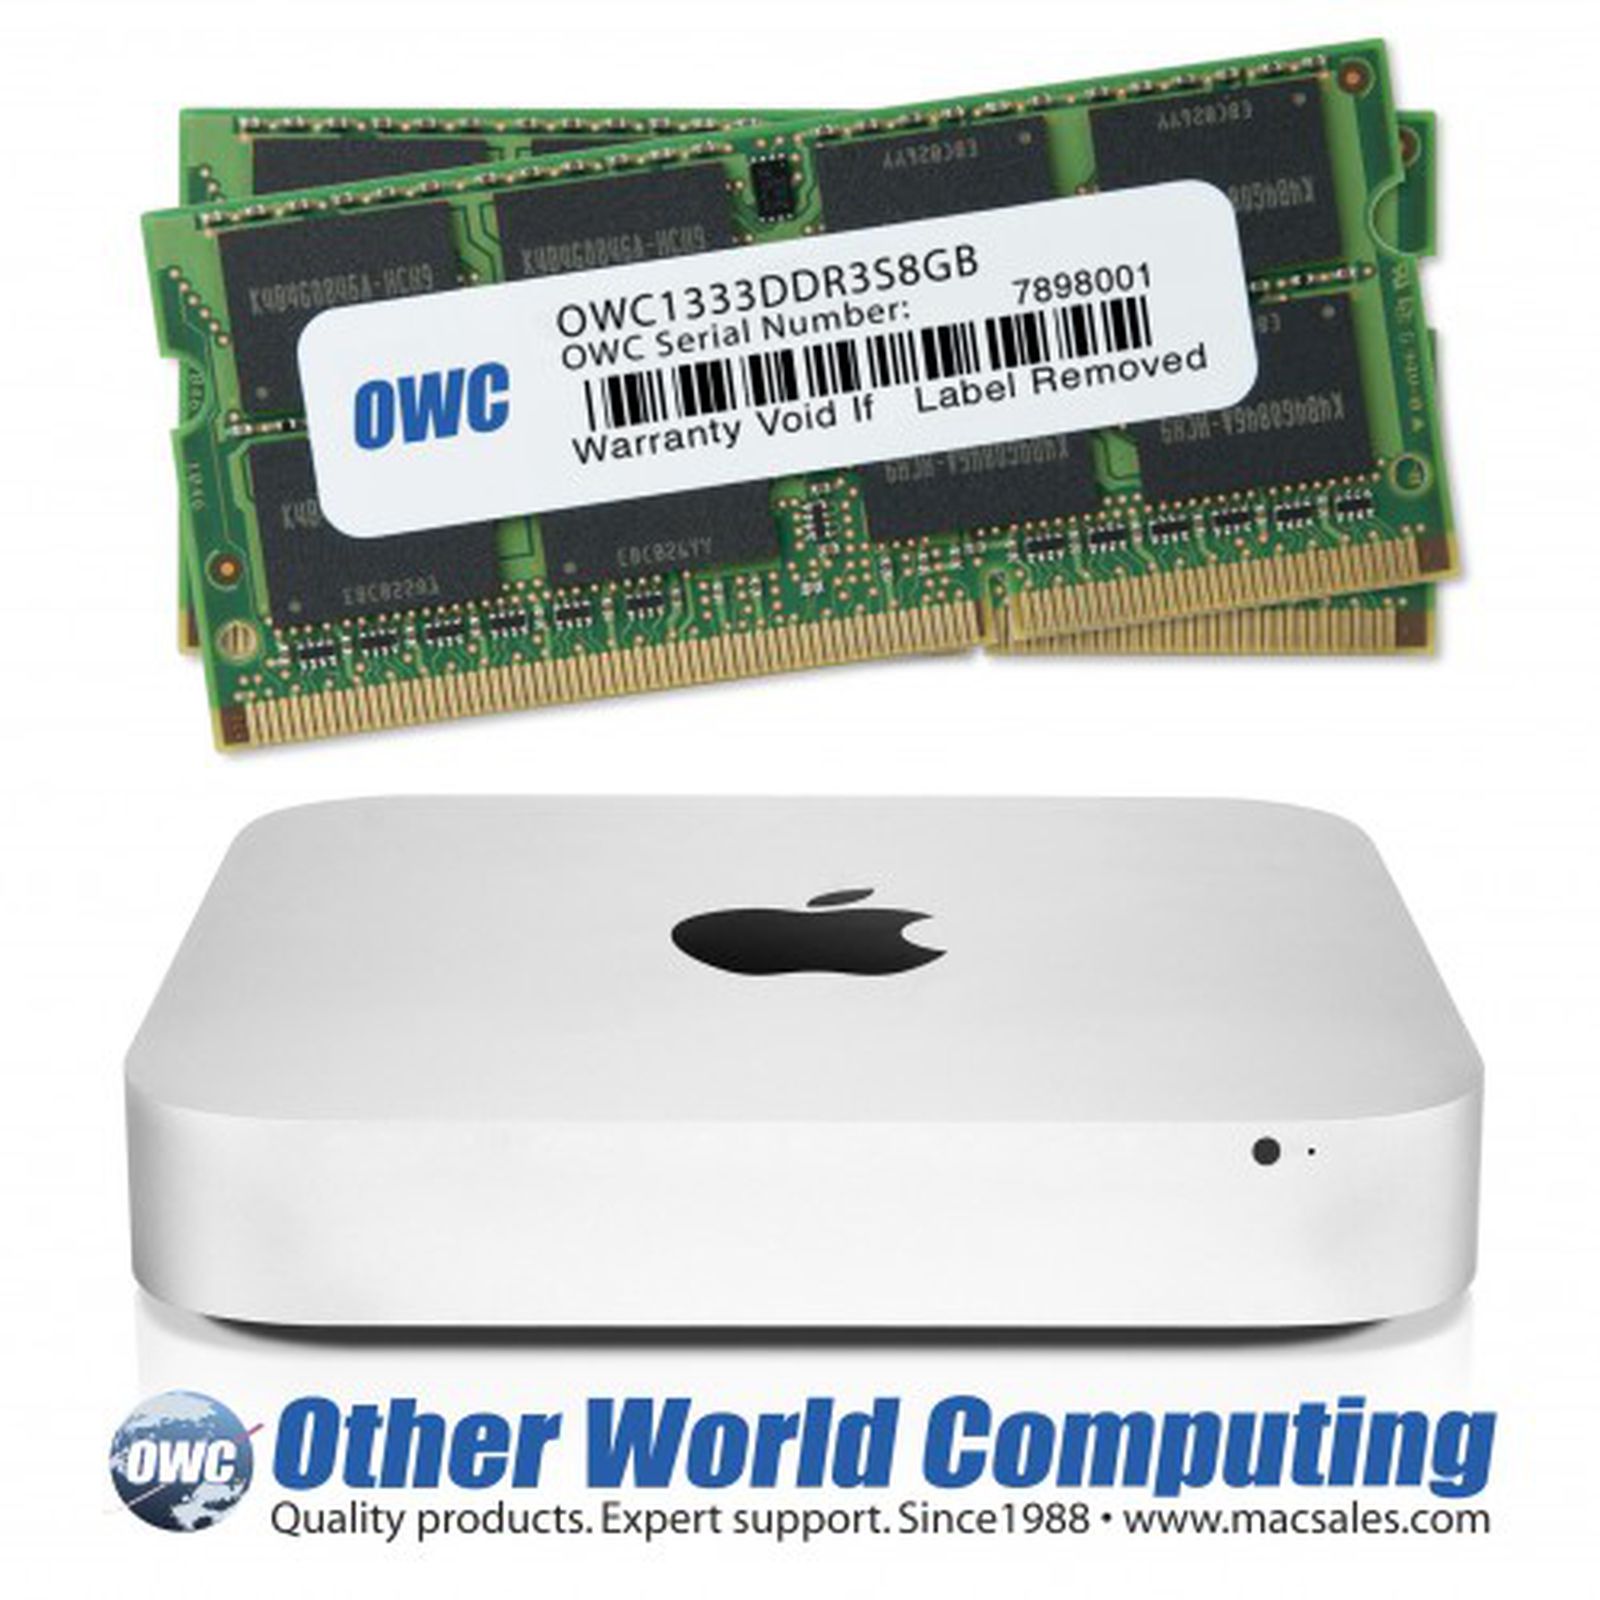 Enig med Peep matchmaker OWC Offers 16GB RAM Upgrade for New Mac Mini, For $1400 - MacRumors